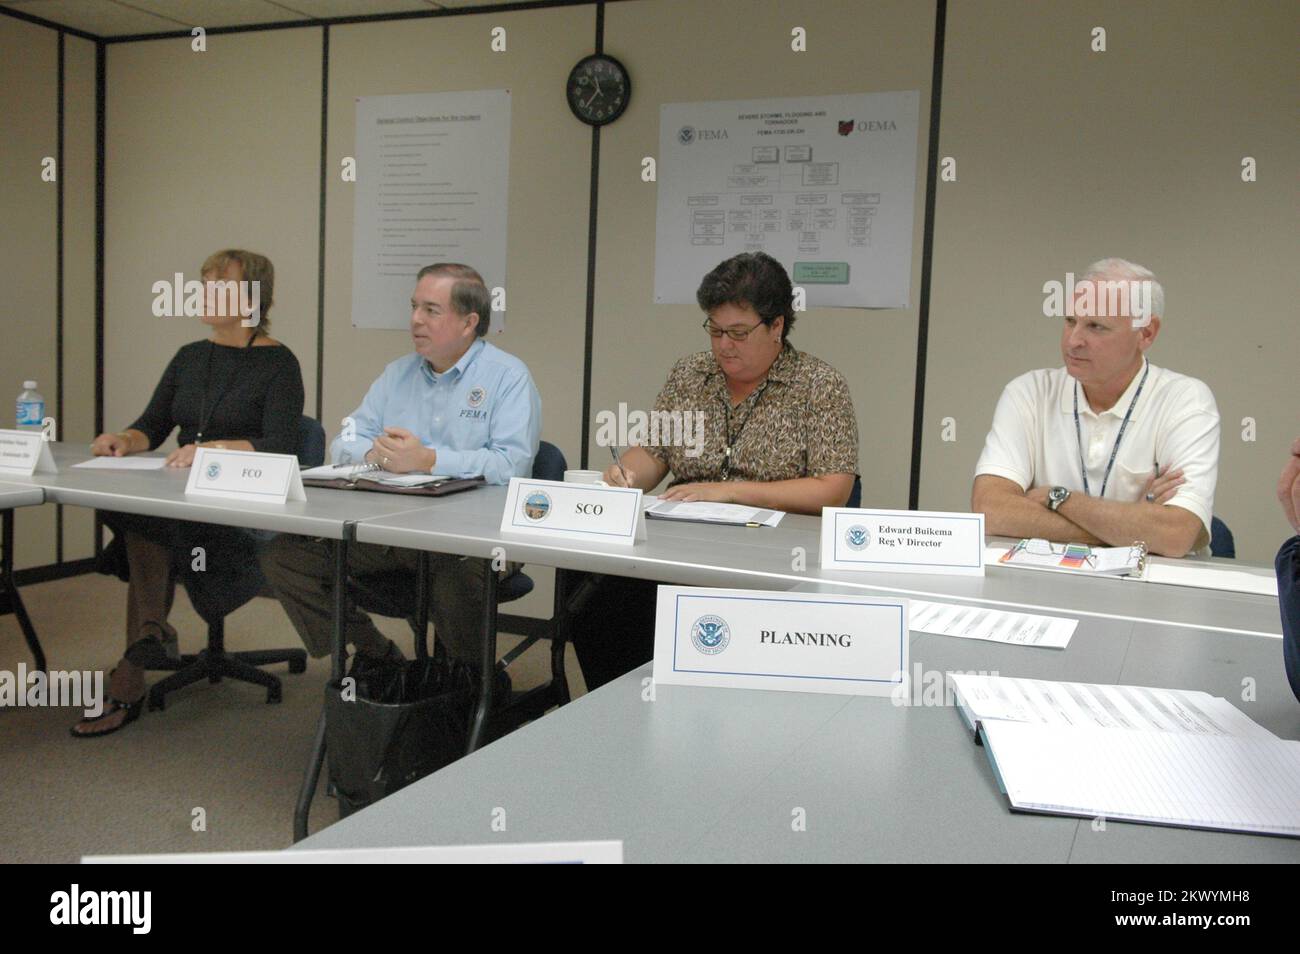 Severe Storms, Flooding, and Tornadoes,  Findlay, Ohio, September 5, 2007   FEMA Region 5 Administrator Edward Buikema (right) joins FCO Jesse Munoz (center left) during the FCO's meeting at the Joint Field Office (JFO). The FCO has periodic meetings with his staff to keep abreast of the recovery process. Mark Wolfe/FEMA.. Photographs Relating to Disasters and Emergency Management Programs, Activities, and Officials Stock Photo